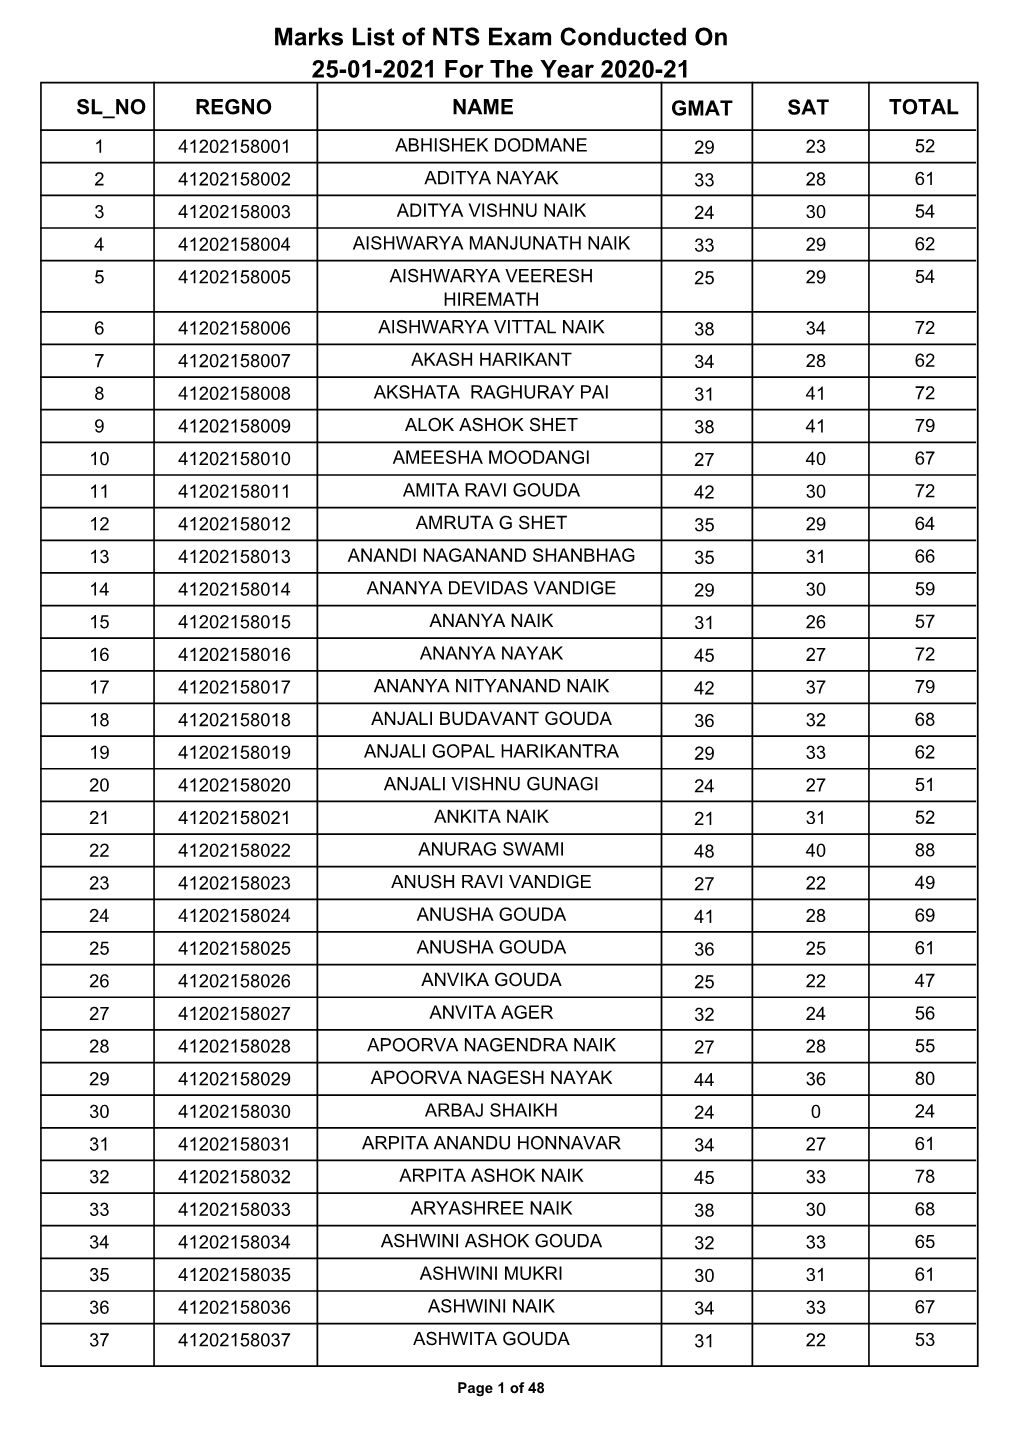 Marks List of NTS Exam Conducted on 25-01-2021 for the Year 2020-21 SL NO REGNO NAME GMAT SAT TOTAL